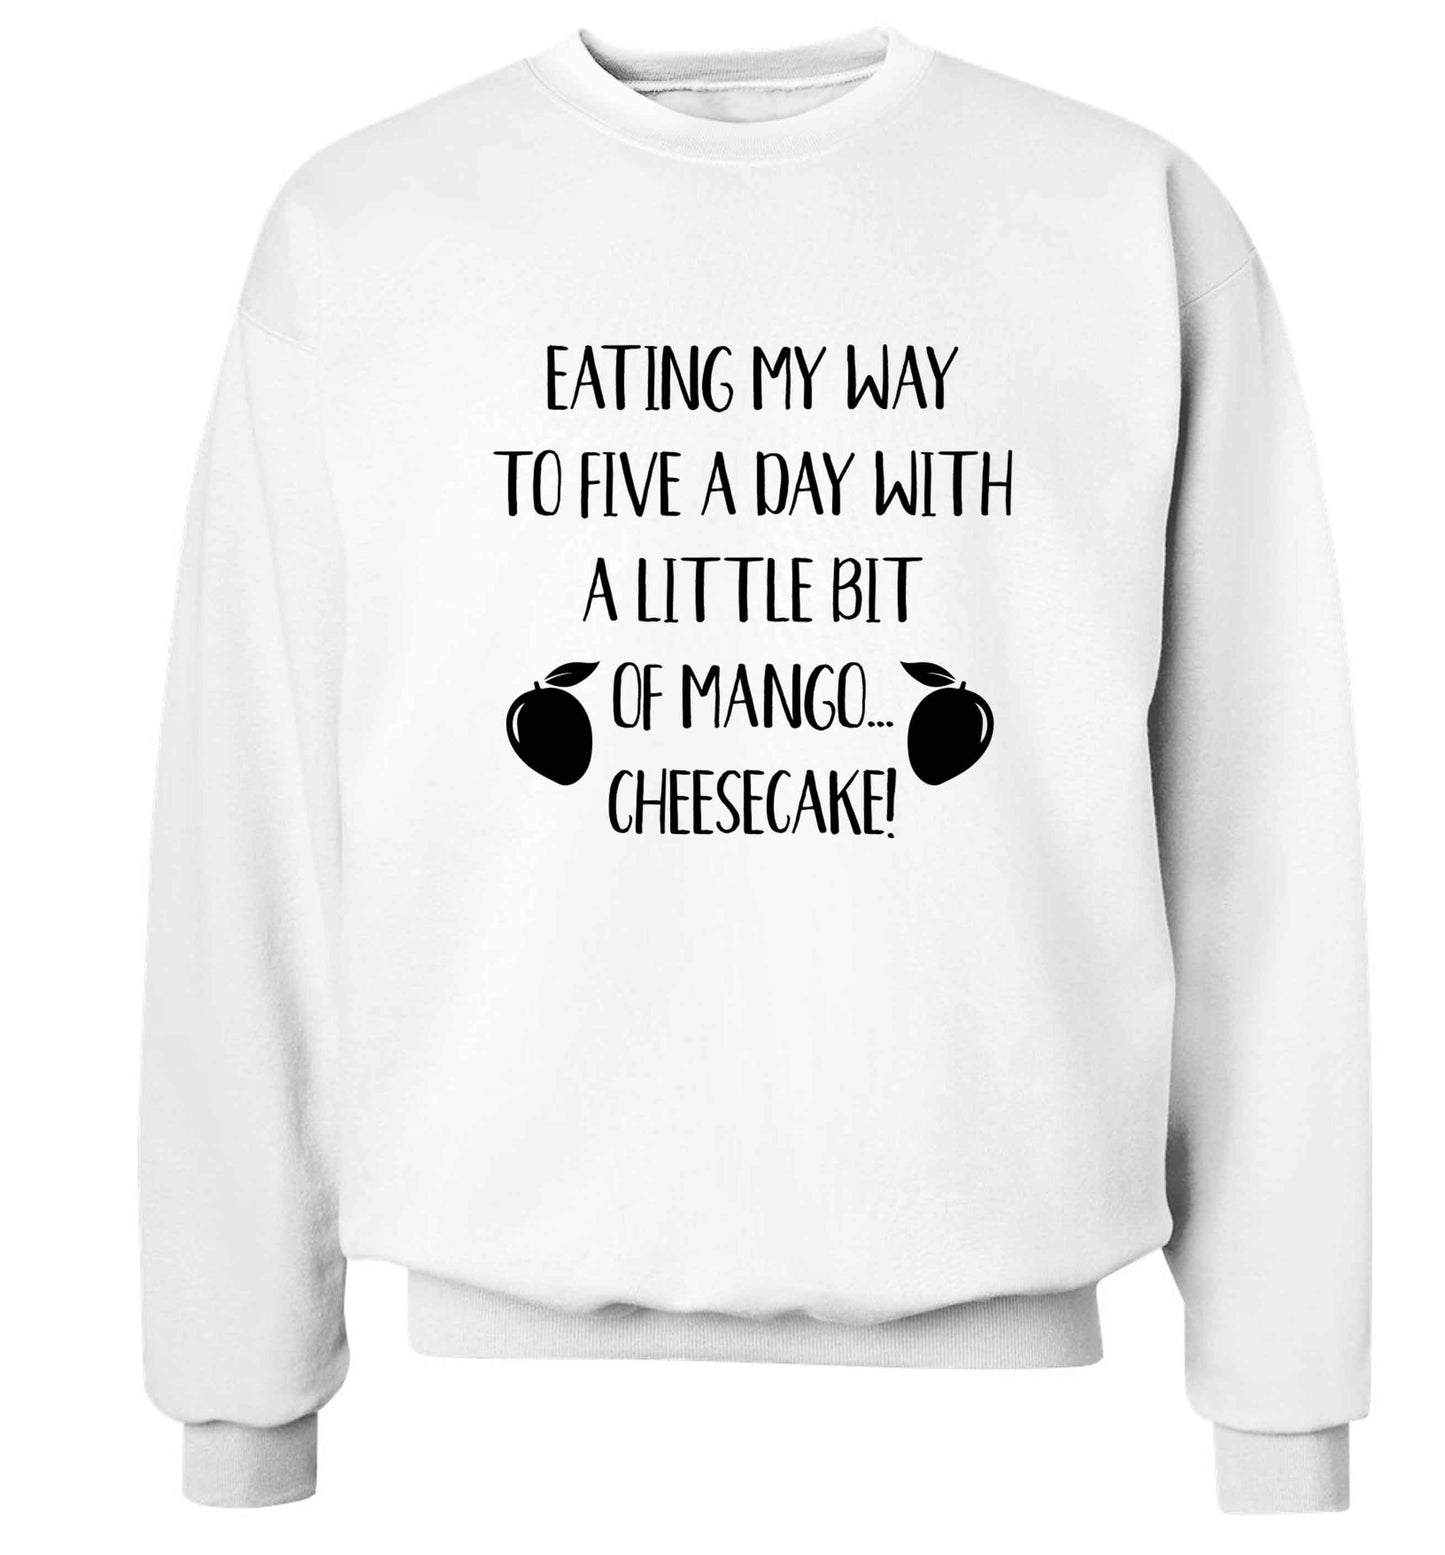 Eating my way to five a day with a little bit of mango cheesecake Adult's unisex white Sweater 2XL